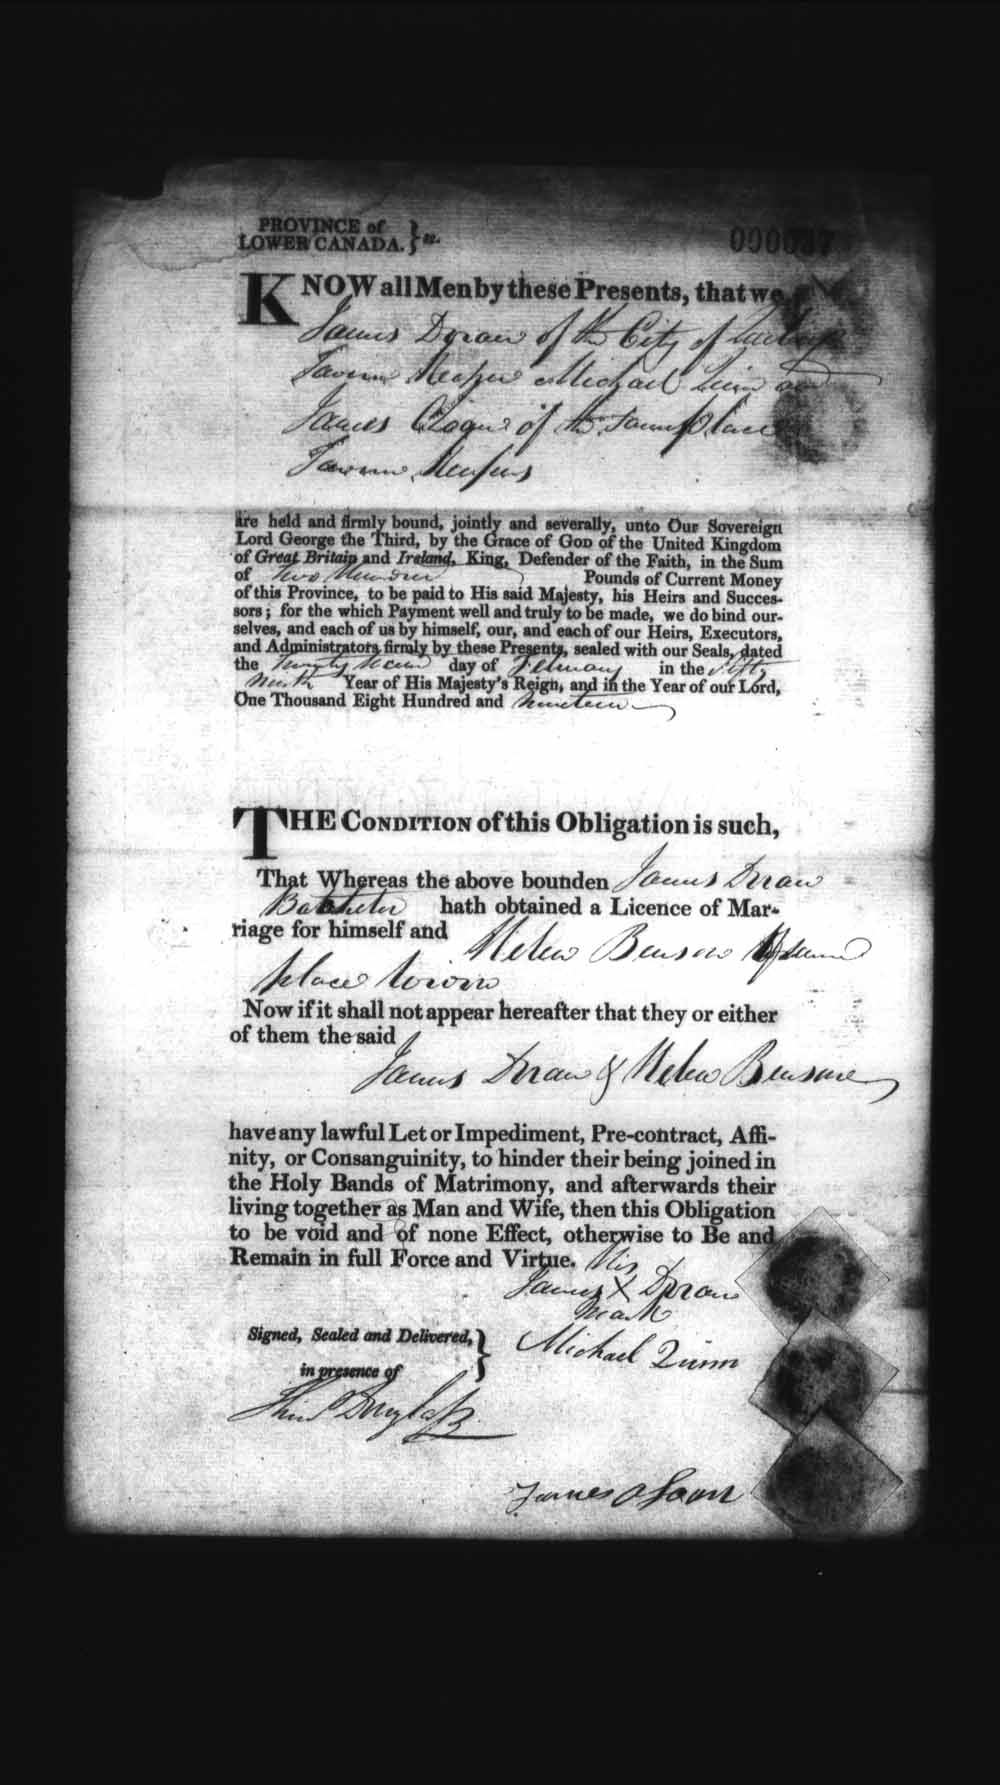 Digitized page of Upper and Lower Canada Marriage Bonds (1779-1865) for Image No.: e008235855